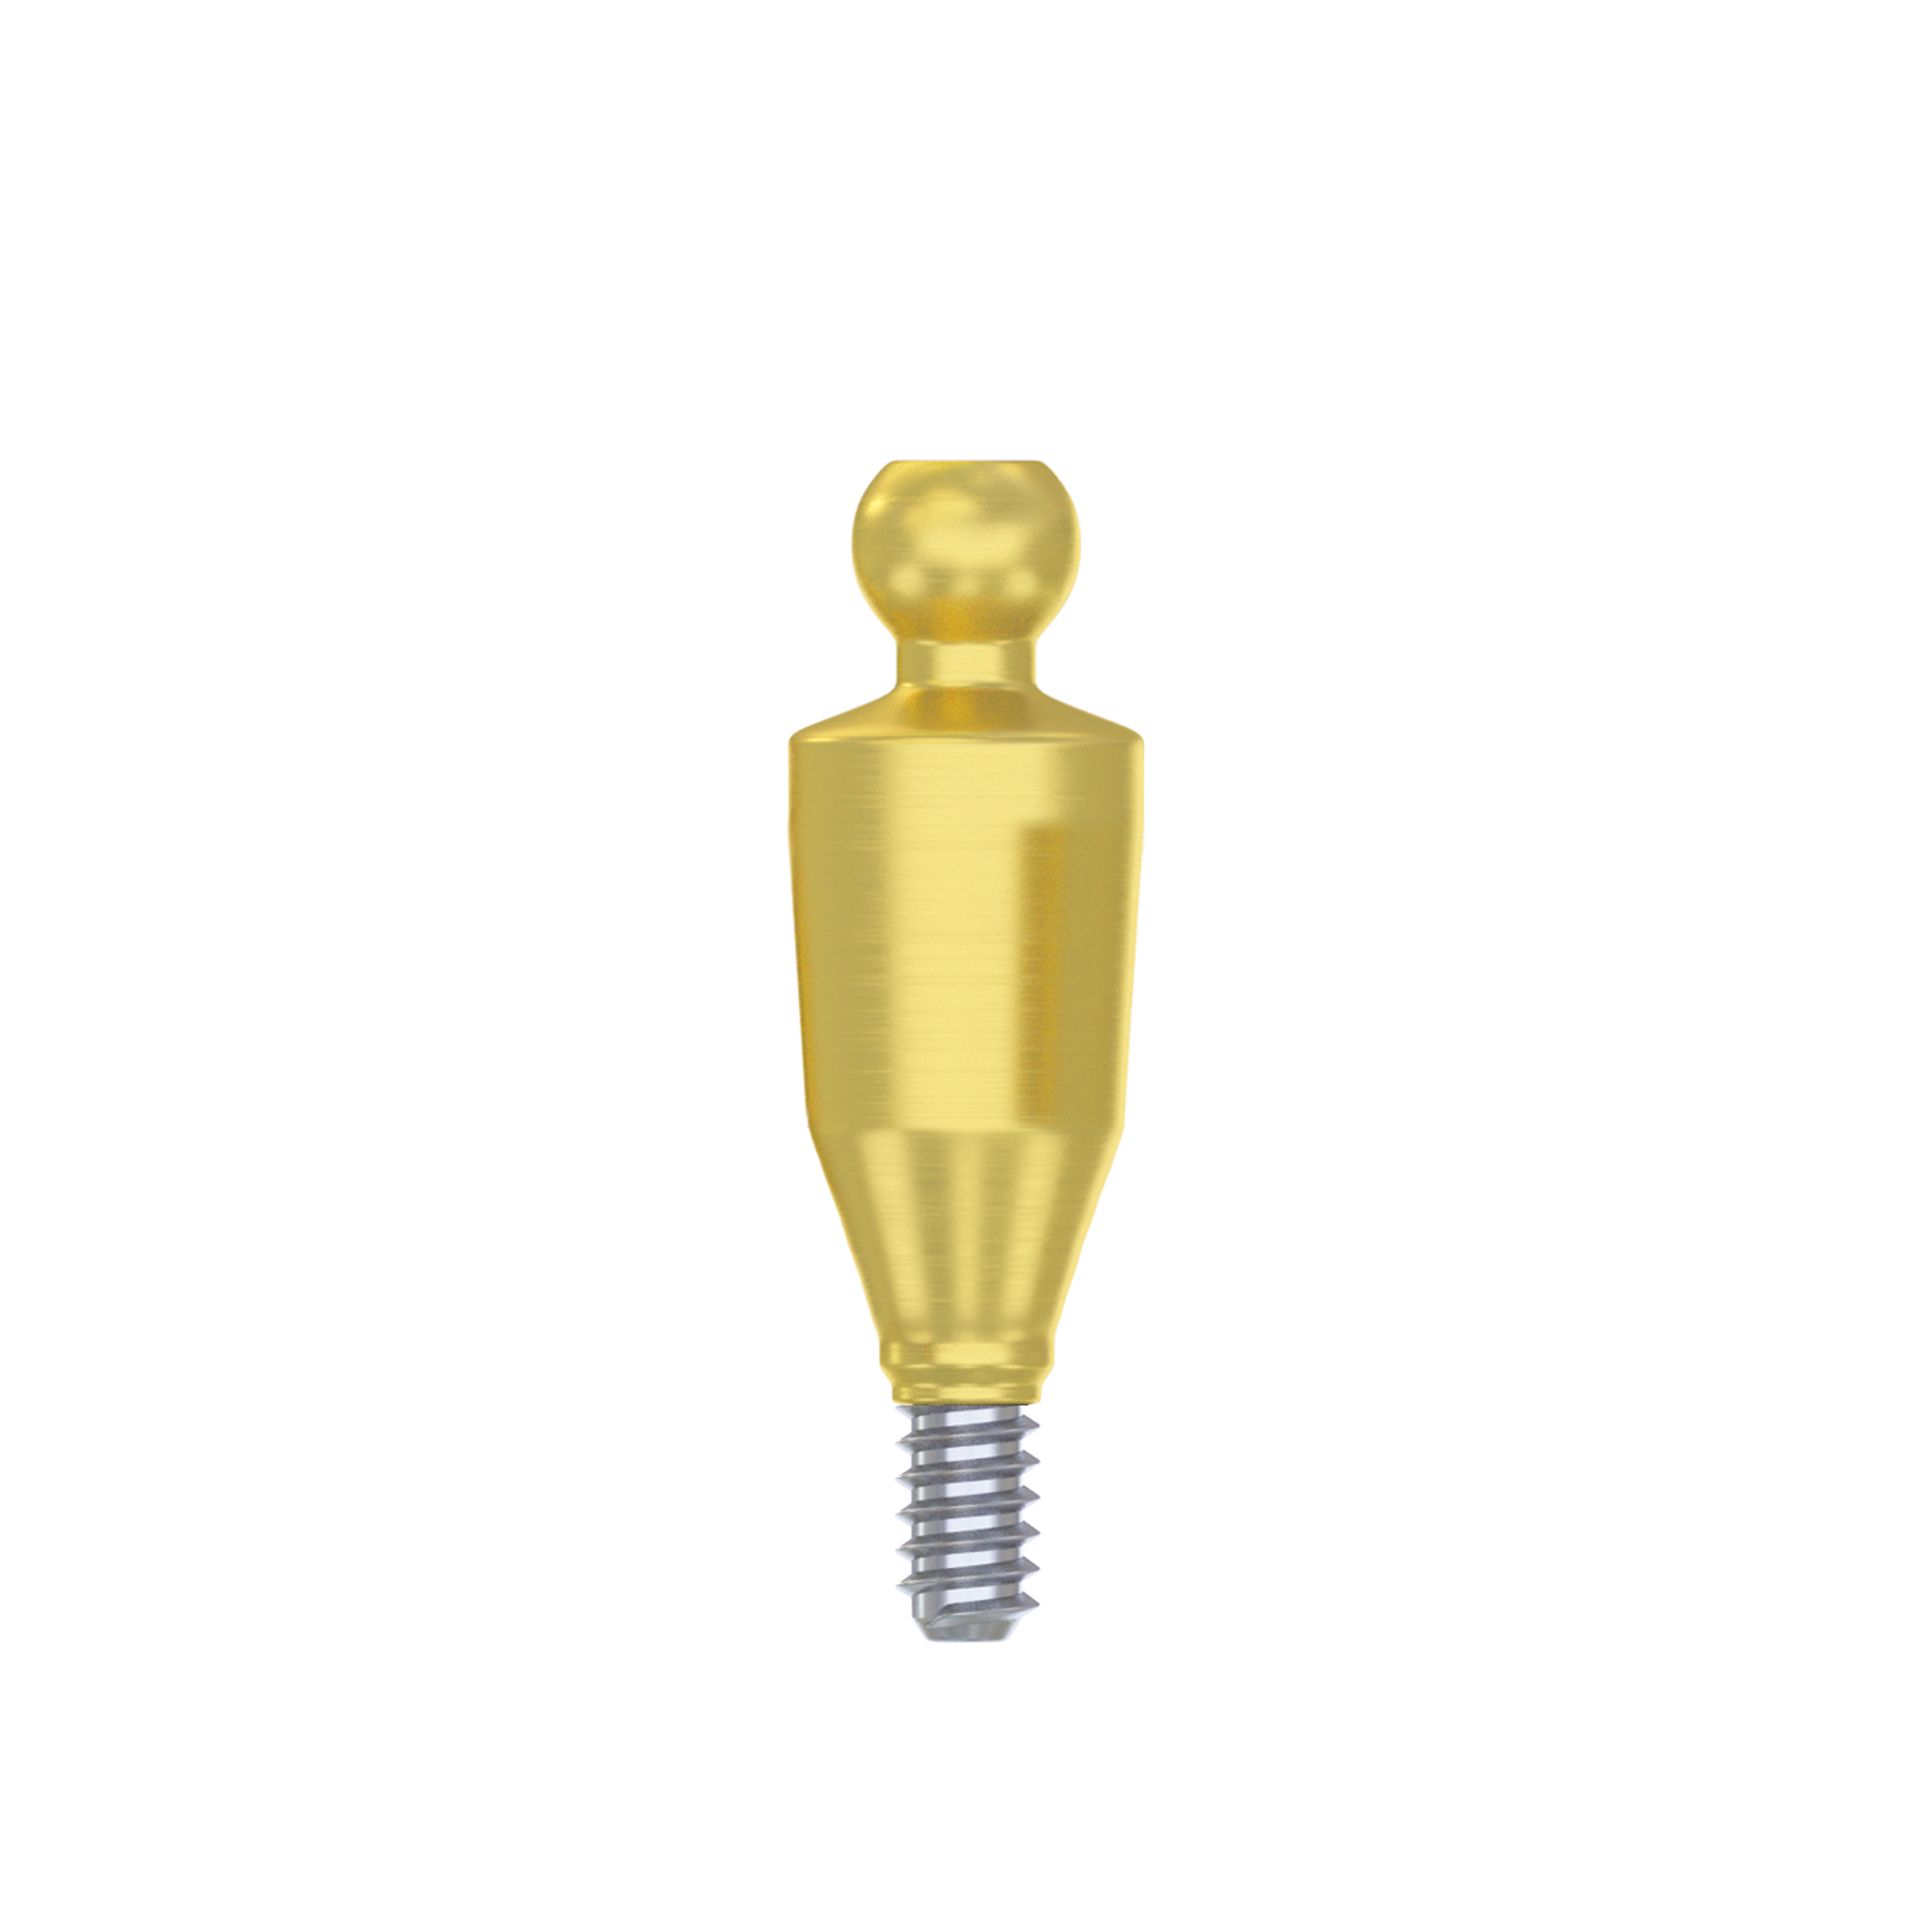 DSI Straight Ball Attachment 3.5mm  - Conical Connection NP Ø3.5mm